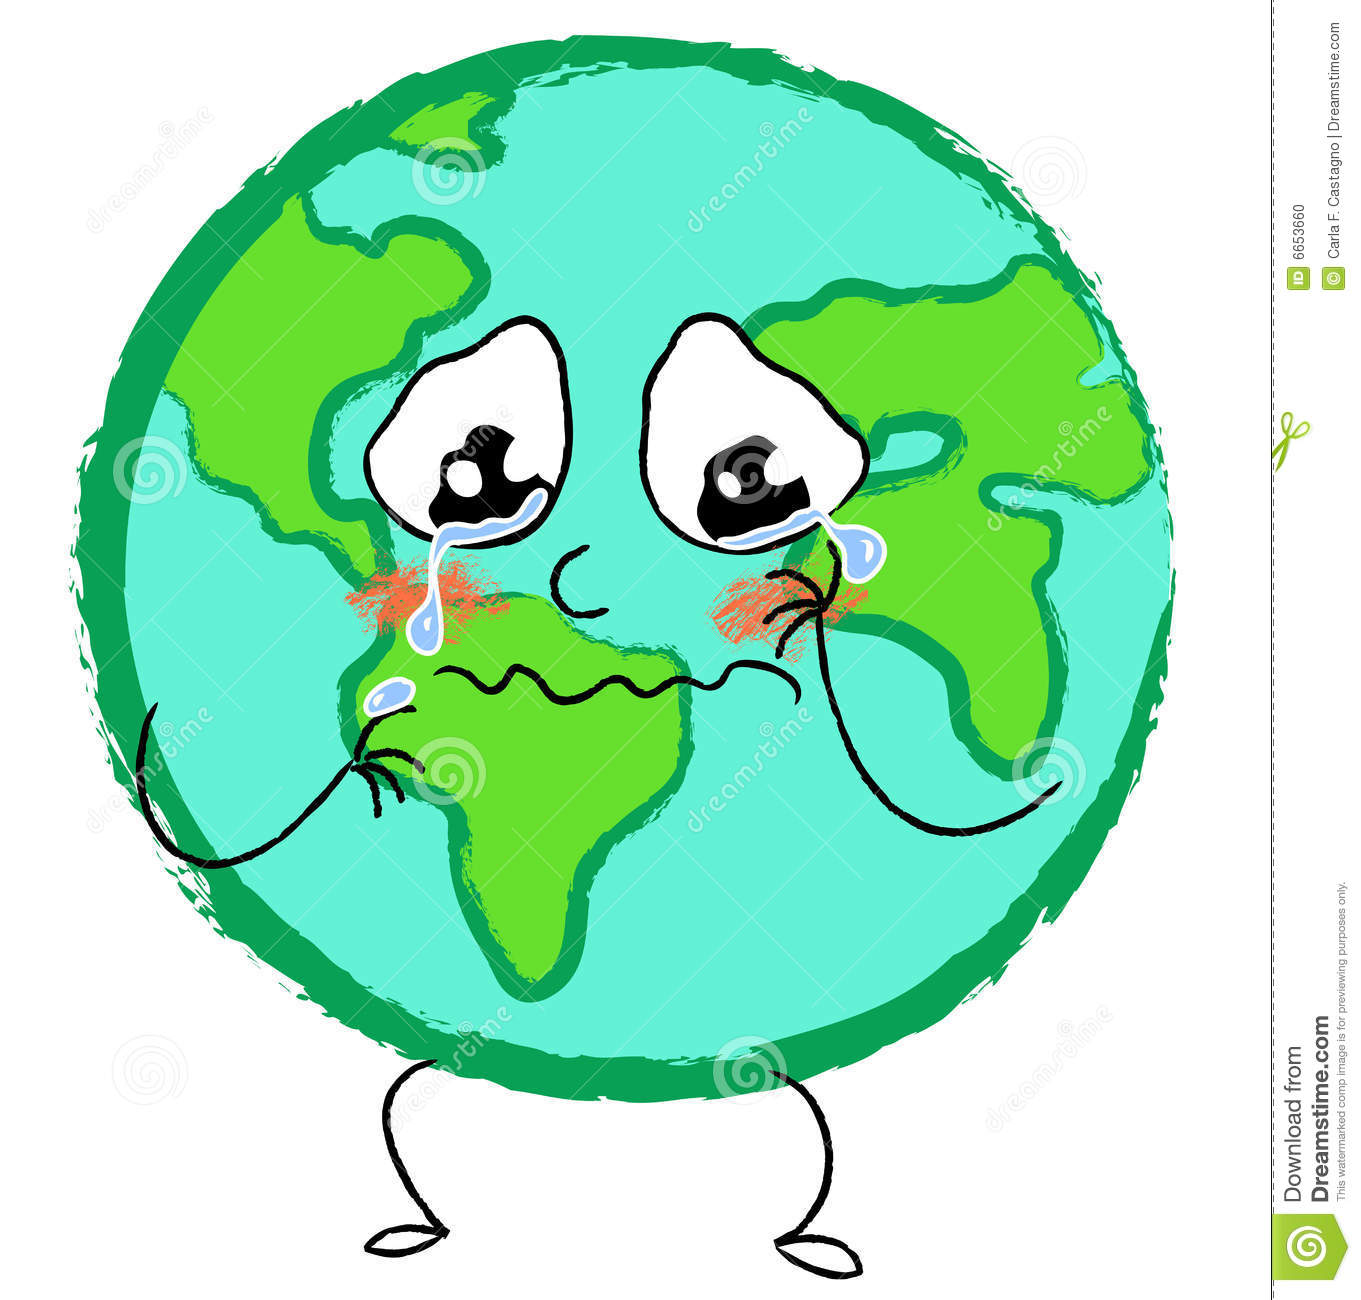 Vector Illustration Of A Stylized Desperate Earth With A Crying Face